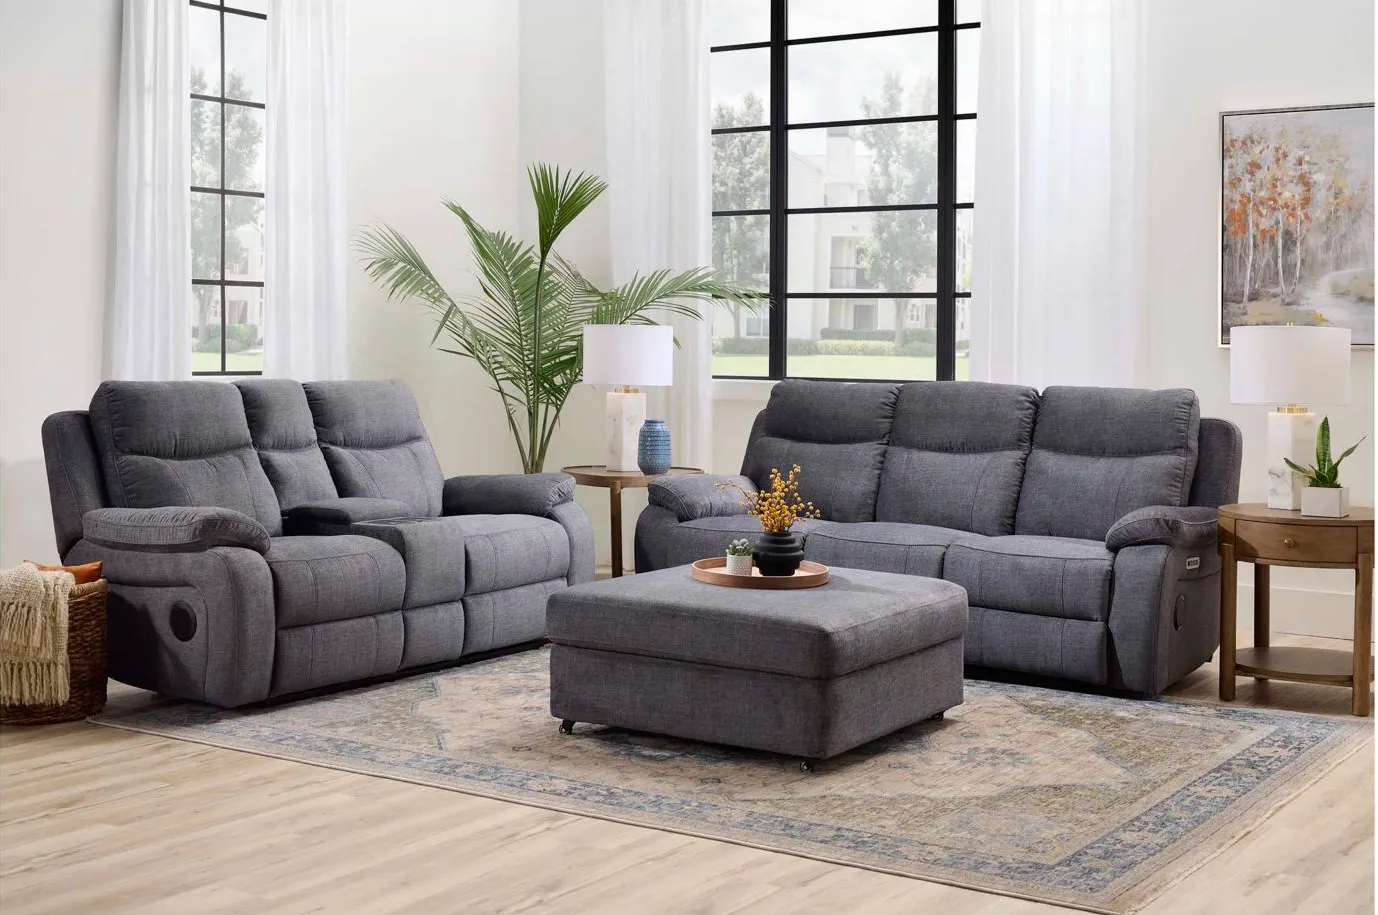 Talan Living Room Set in Gray by Bellanest